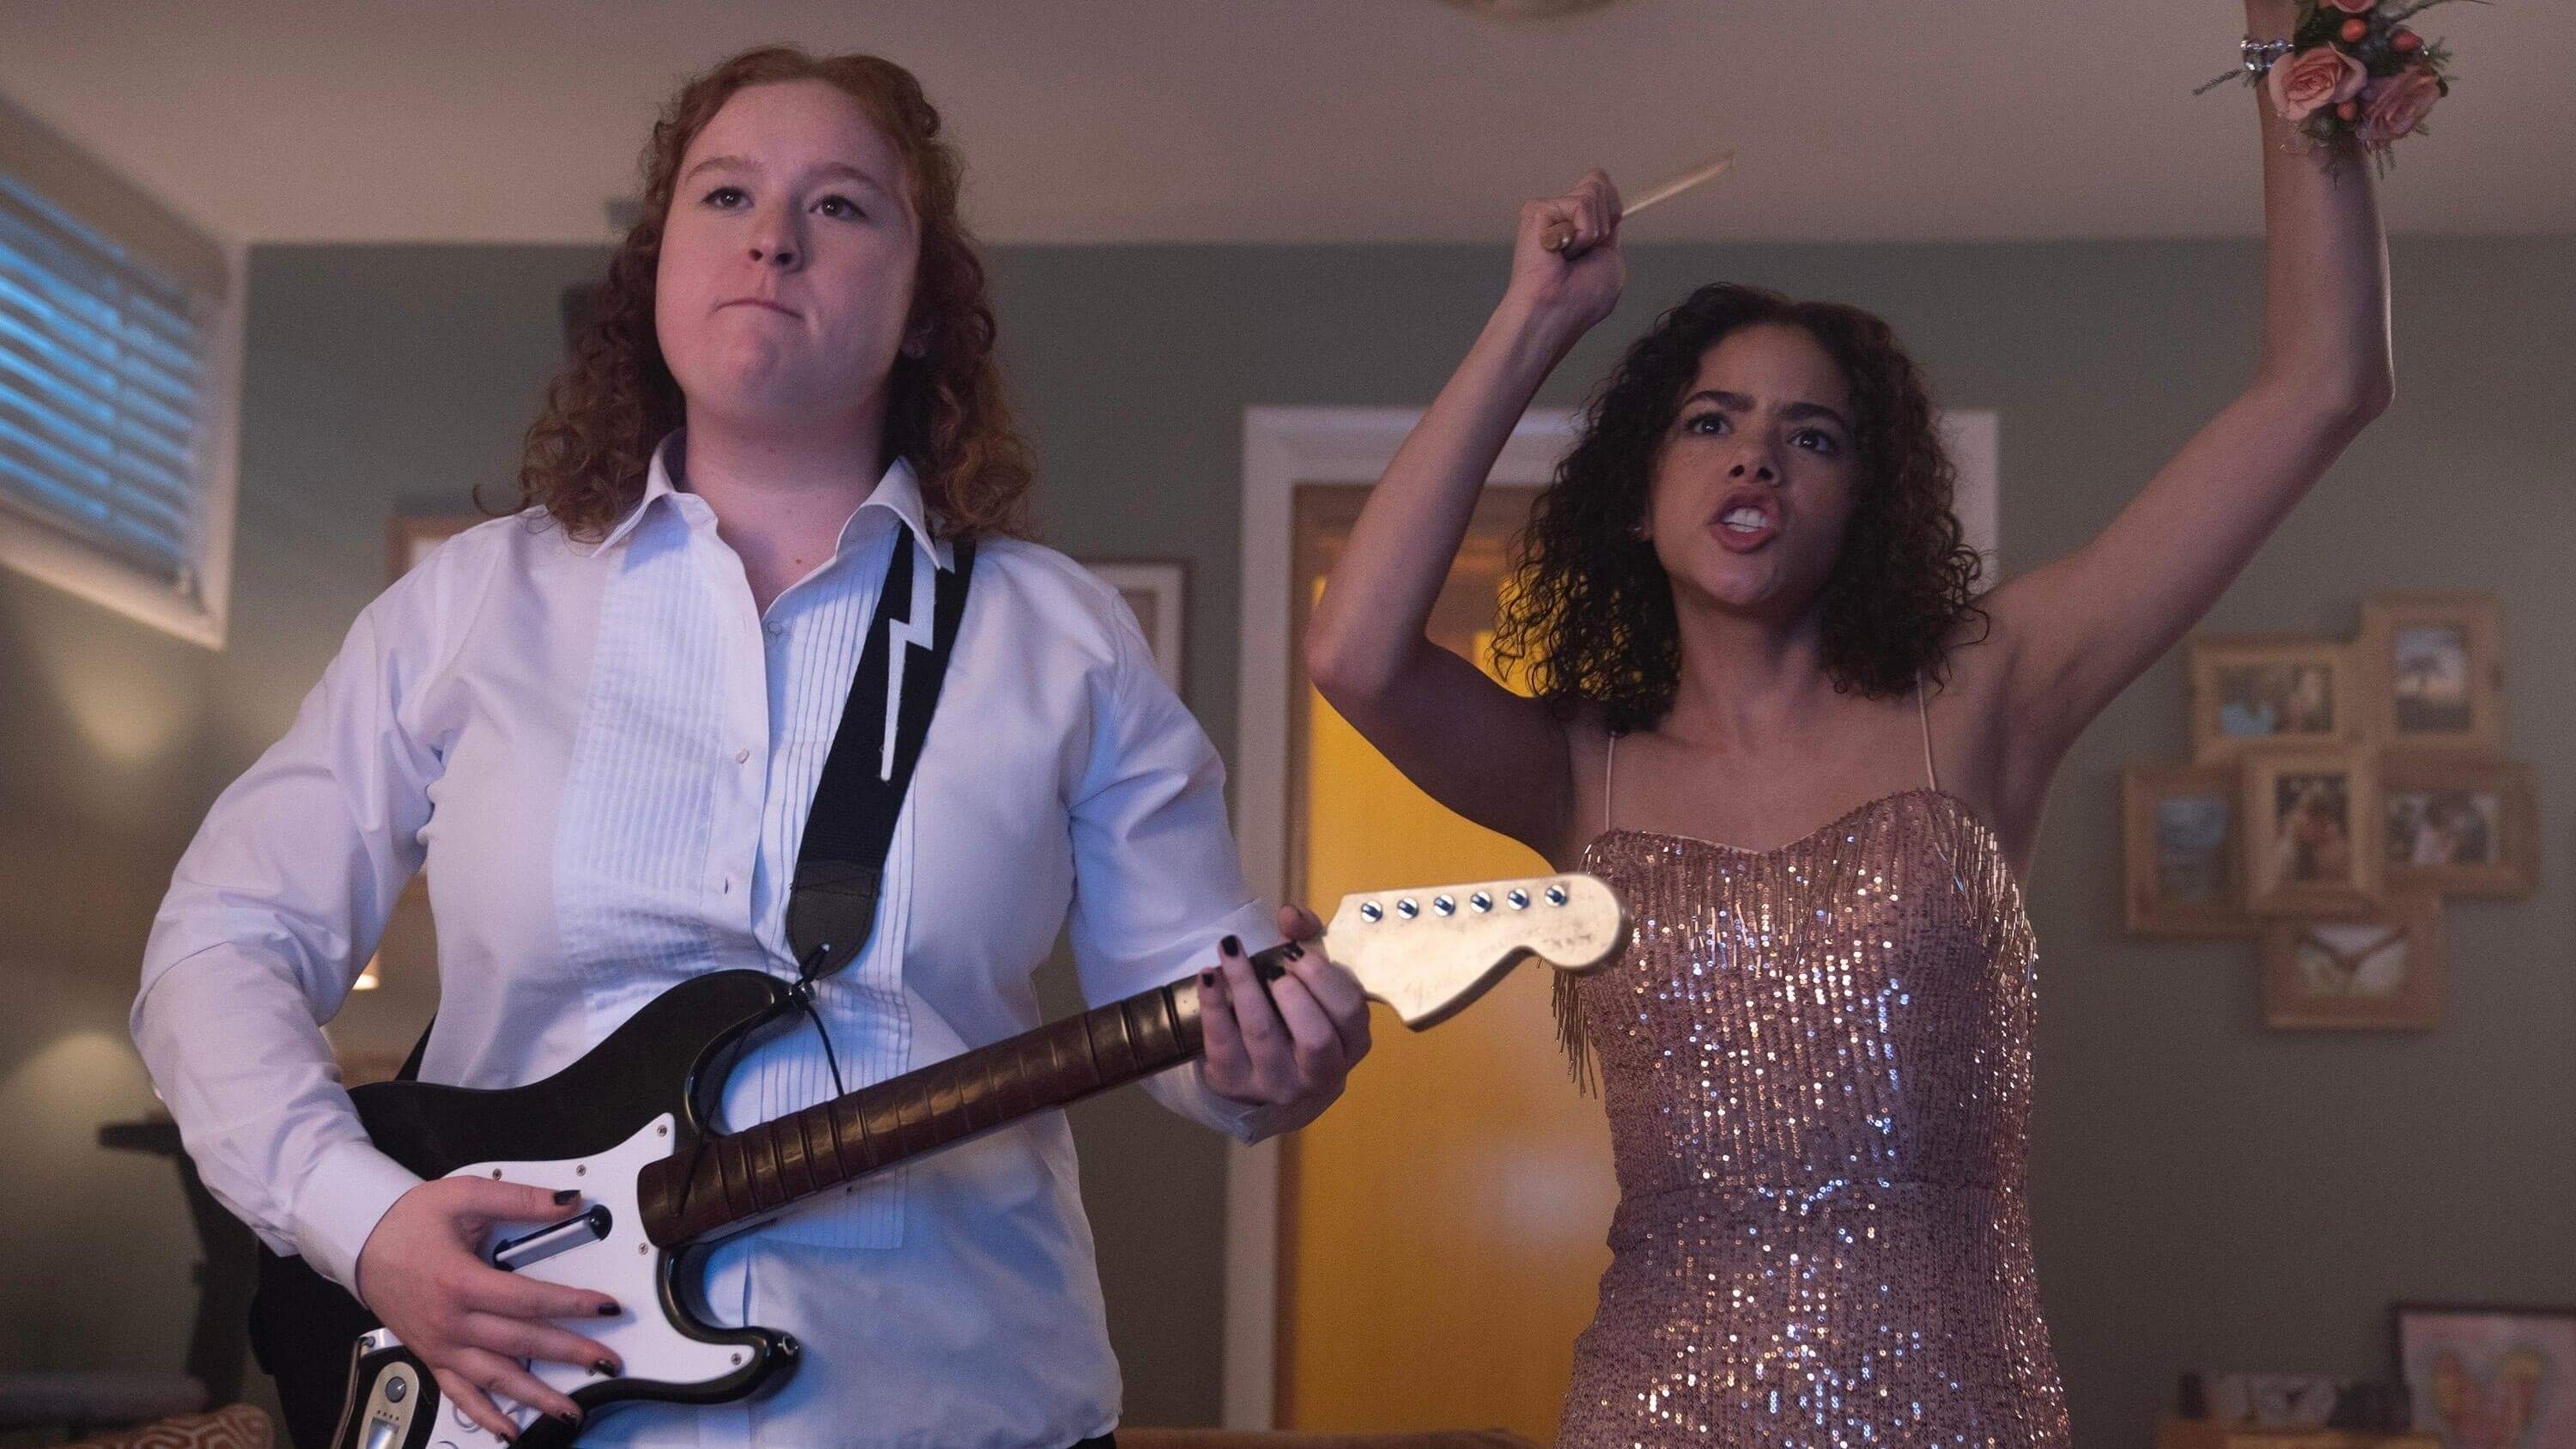 Prom Dates review: A lively entry into the raunchy teen buddy comedy subgenre